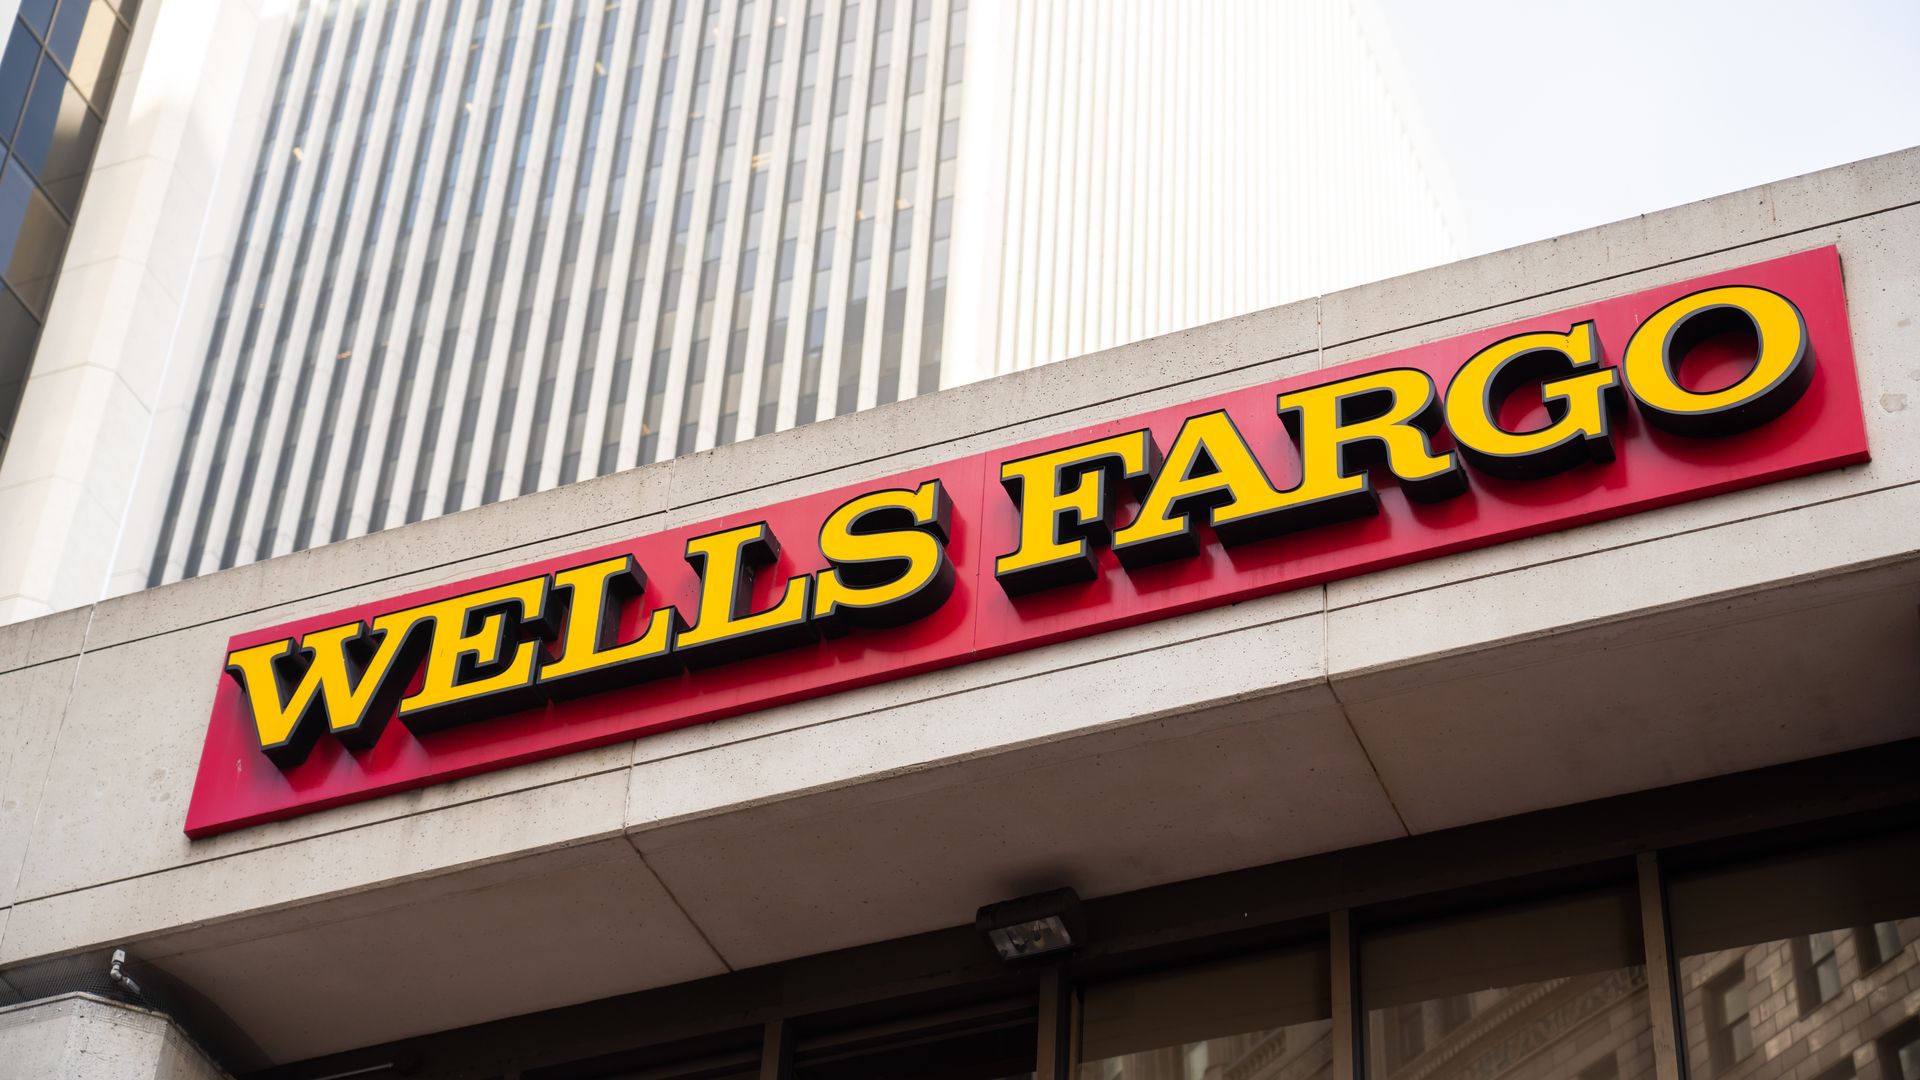 American multinational financial services company Wells Fargo logo seen at one of their branches